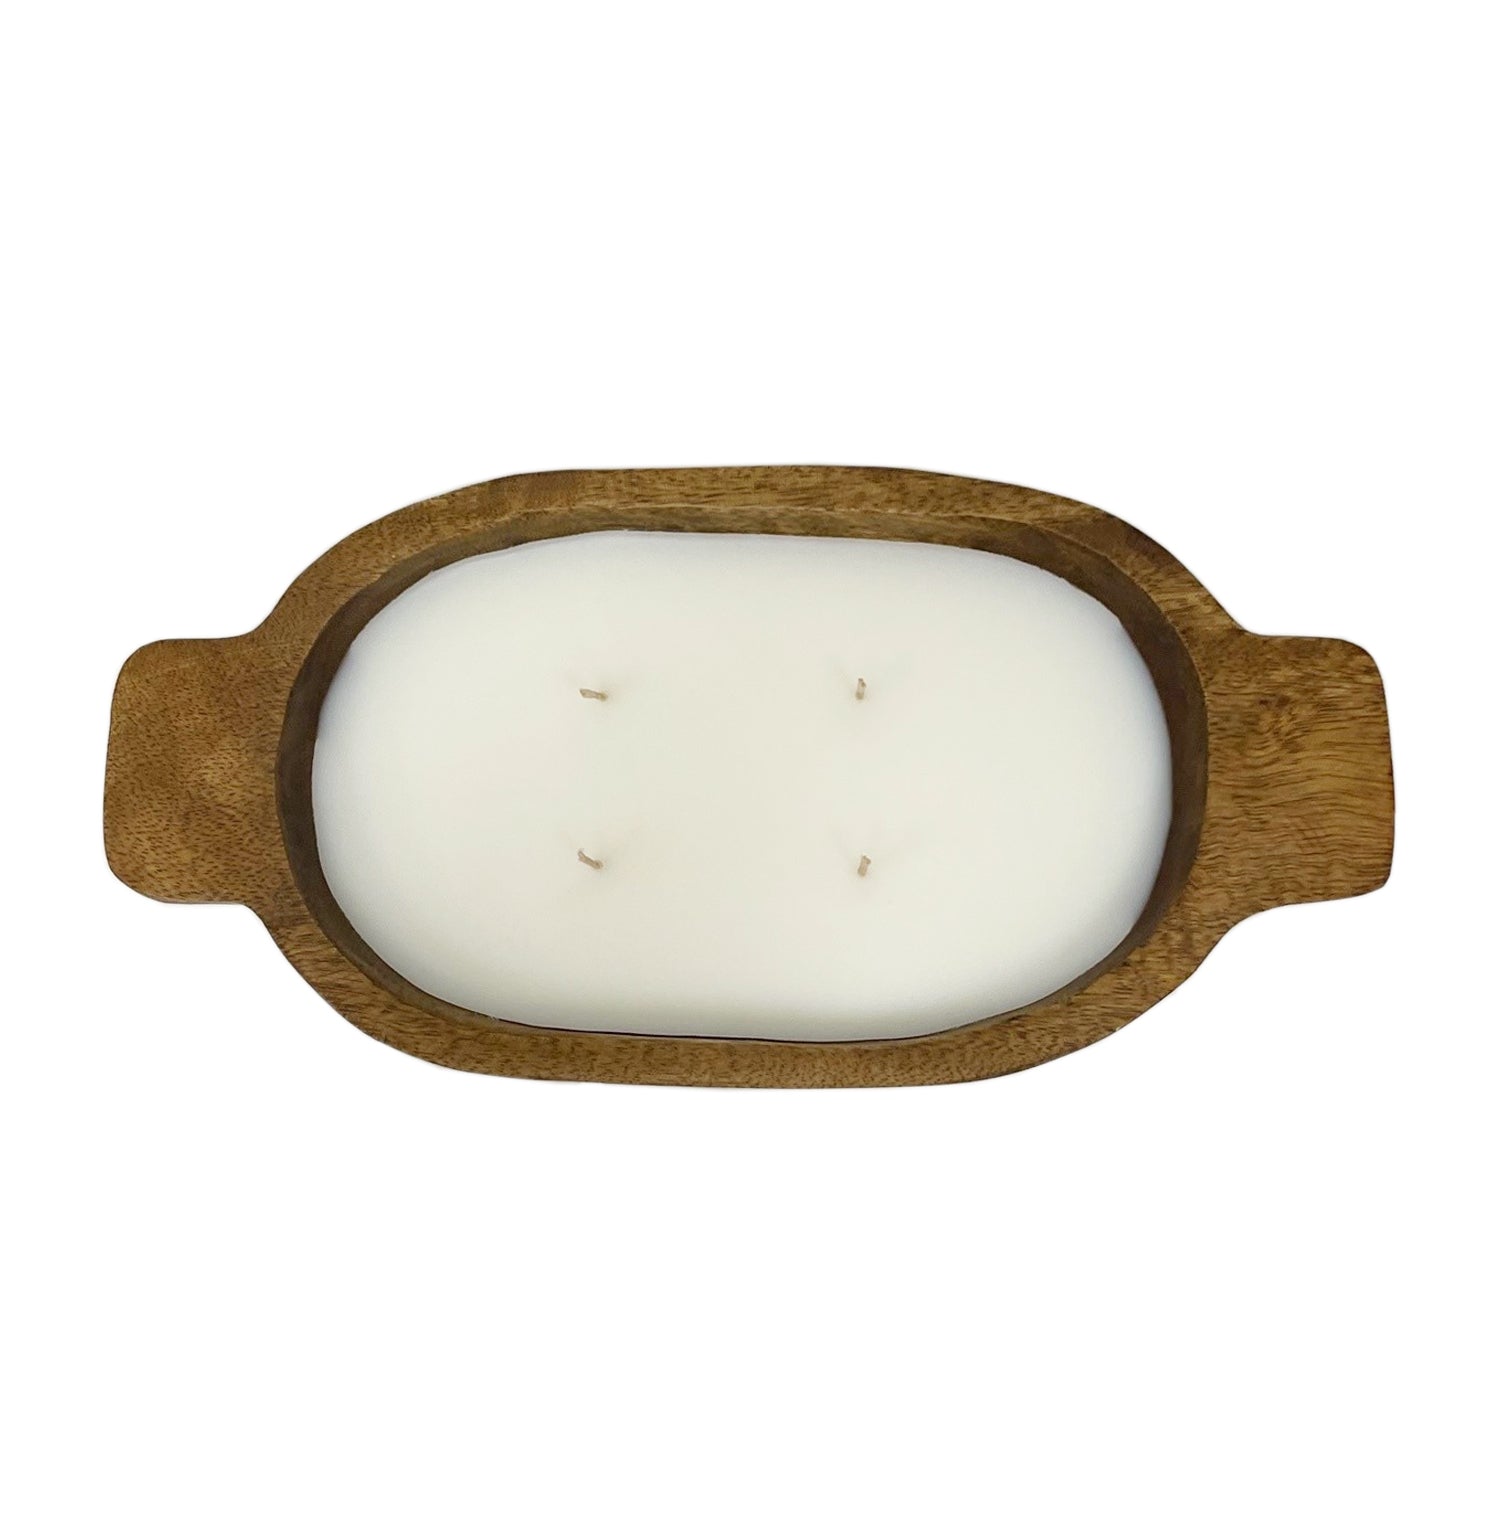 Mango Wood Small Oval Candle with Handles